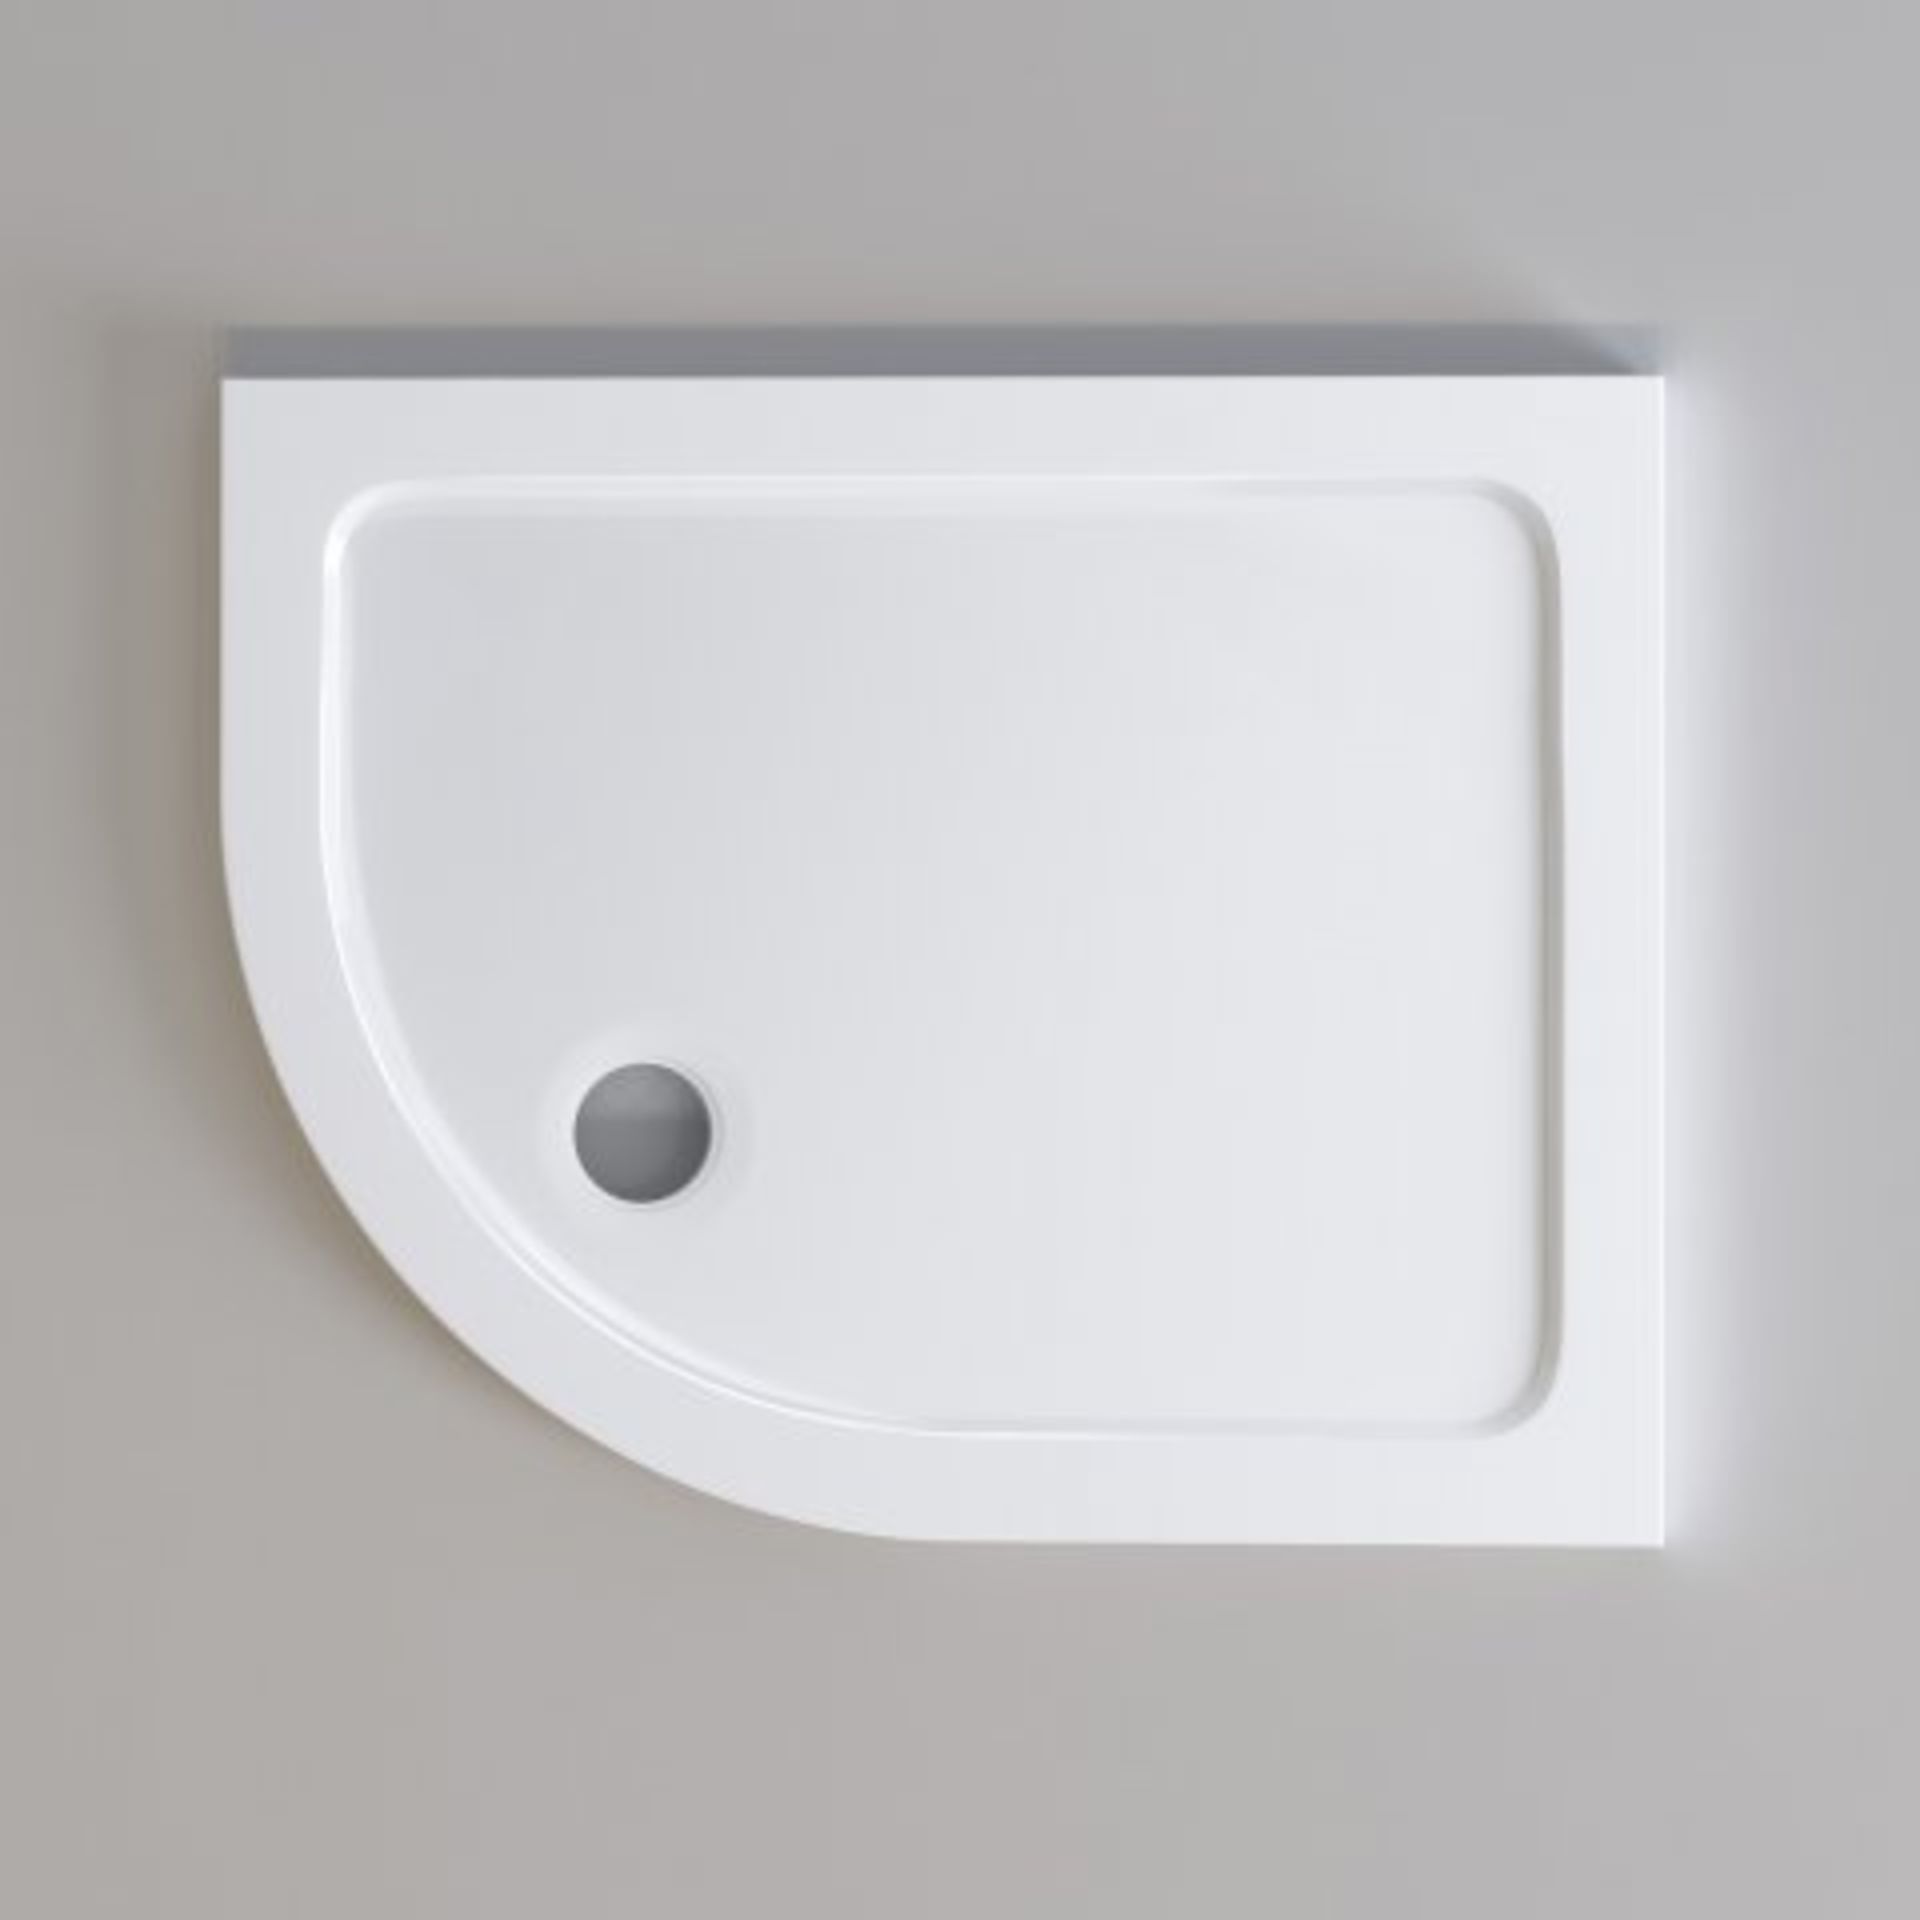 (O245) 1000x800mm Offset Quadrant Ultraslim Stone Shower Tray - Left. RRP £249.99. Designed and made - Image 2 of 2